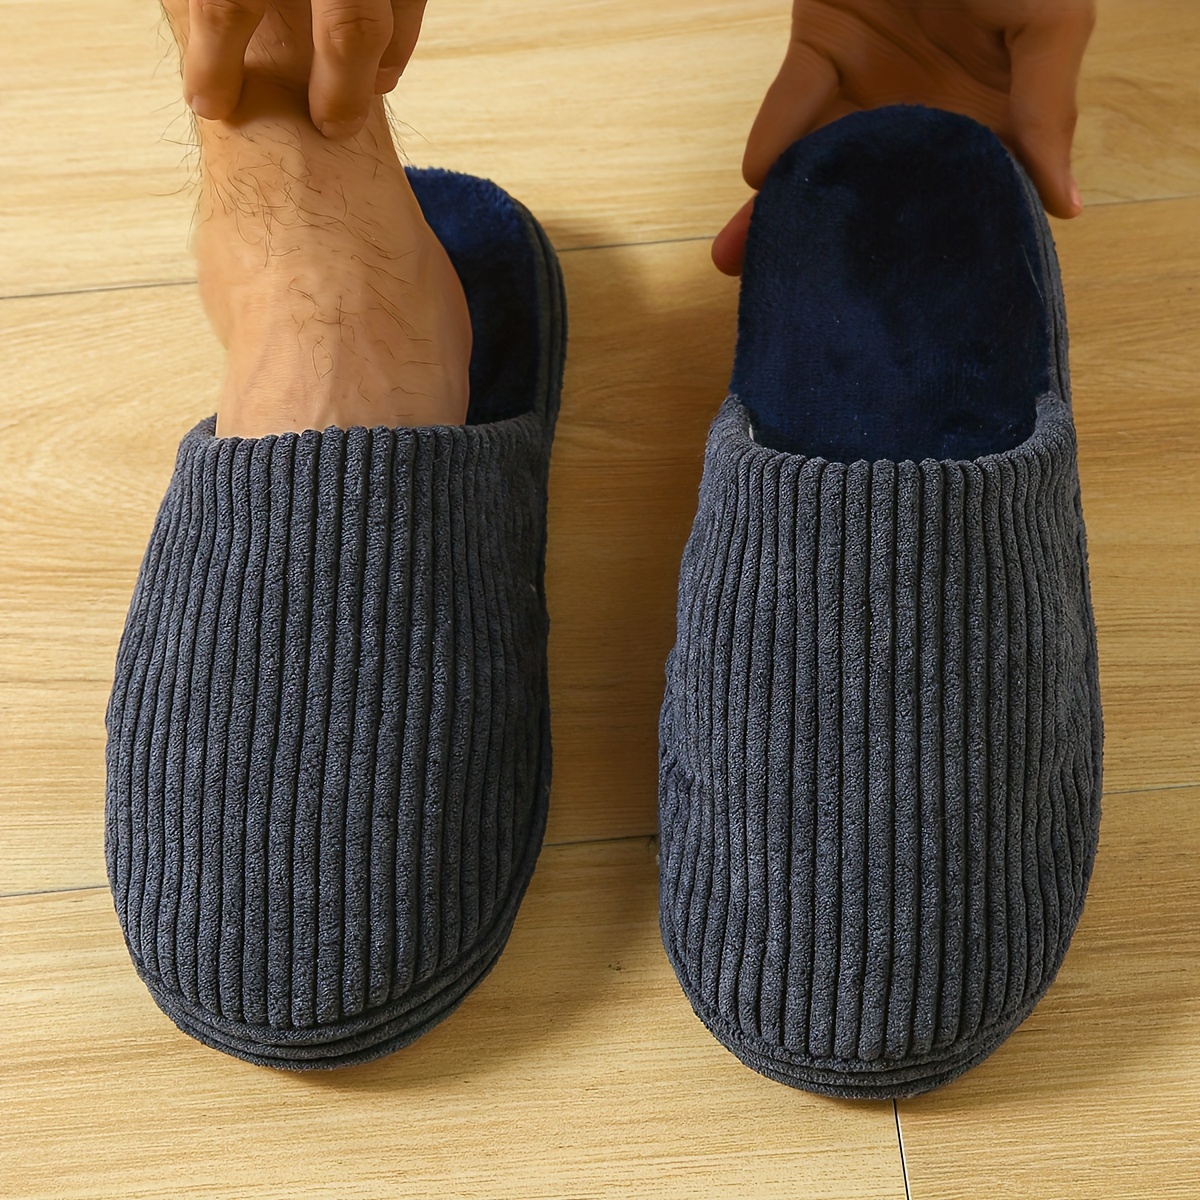 

Men's Solid Color Hollow Out Fuzzy Slippers, Comfy Non Slip Casual Bedroom Shoes, Men's Indoor Footwear